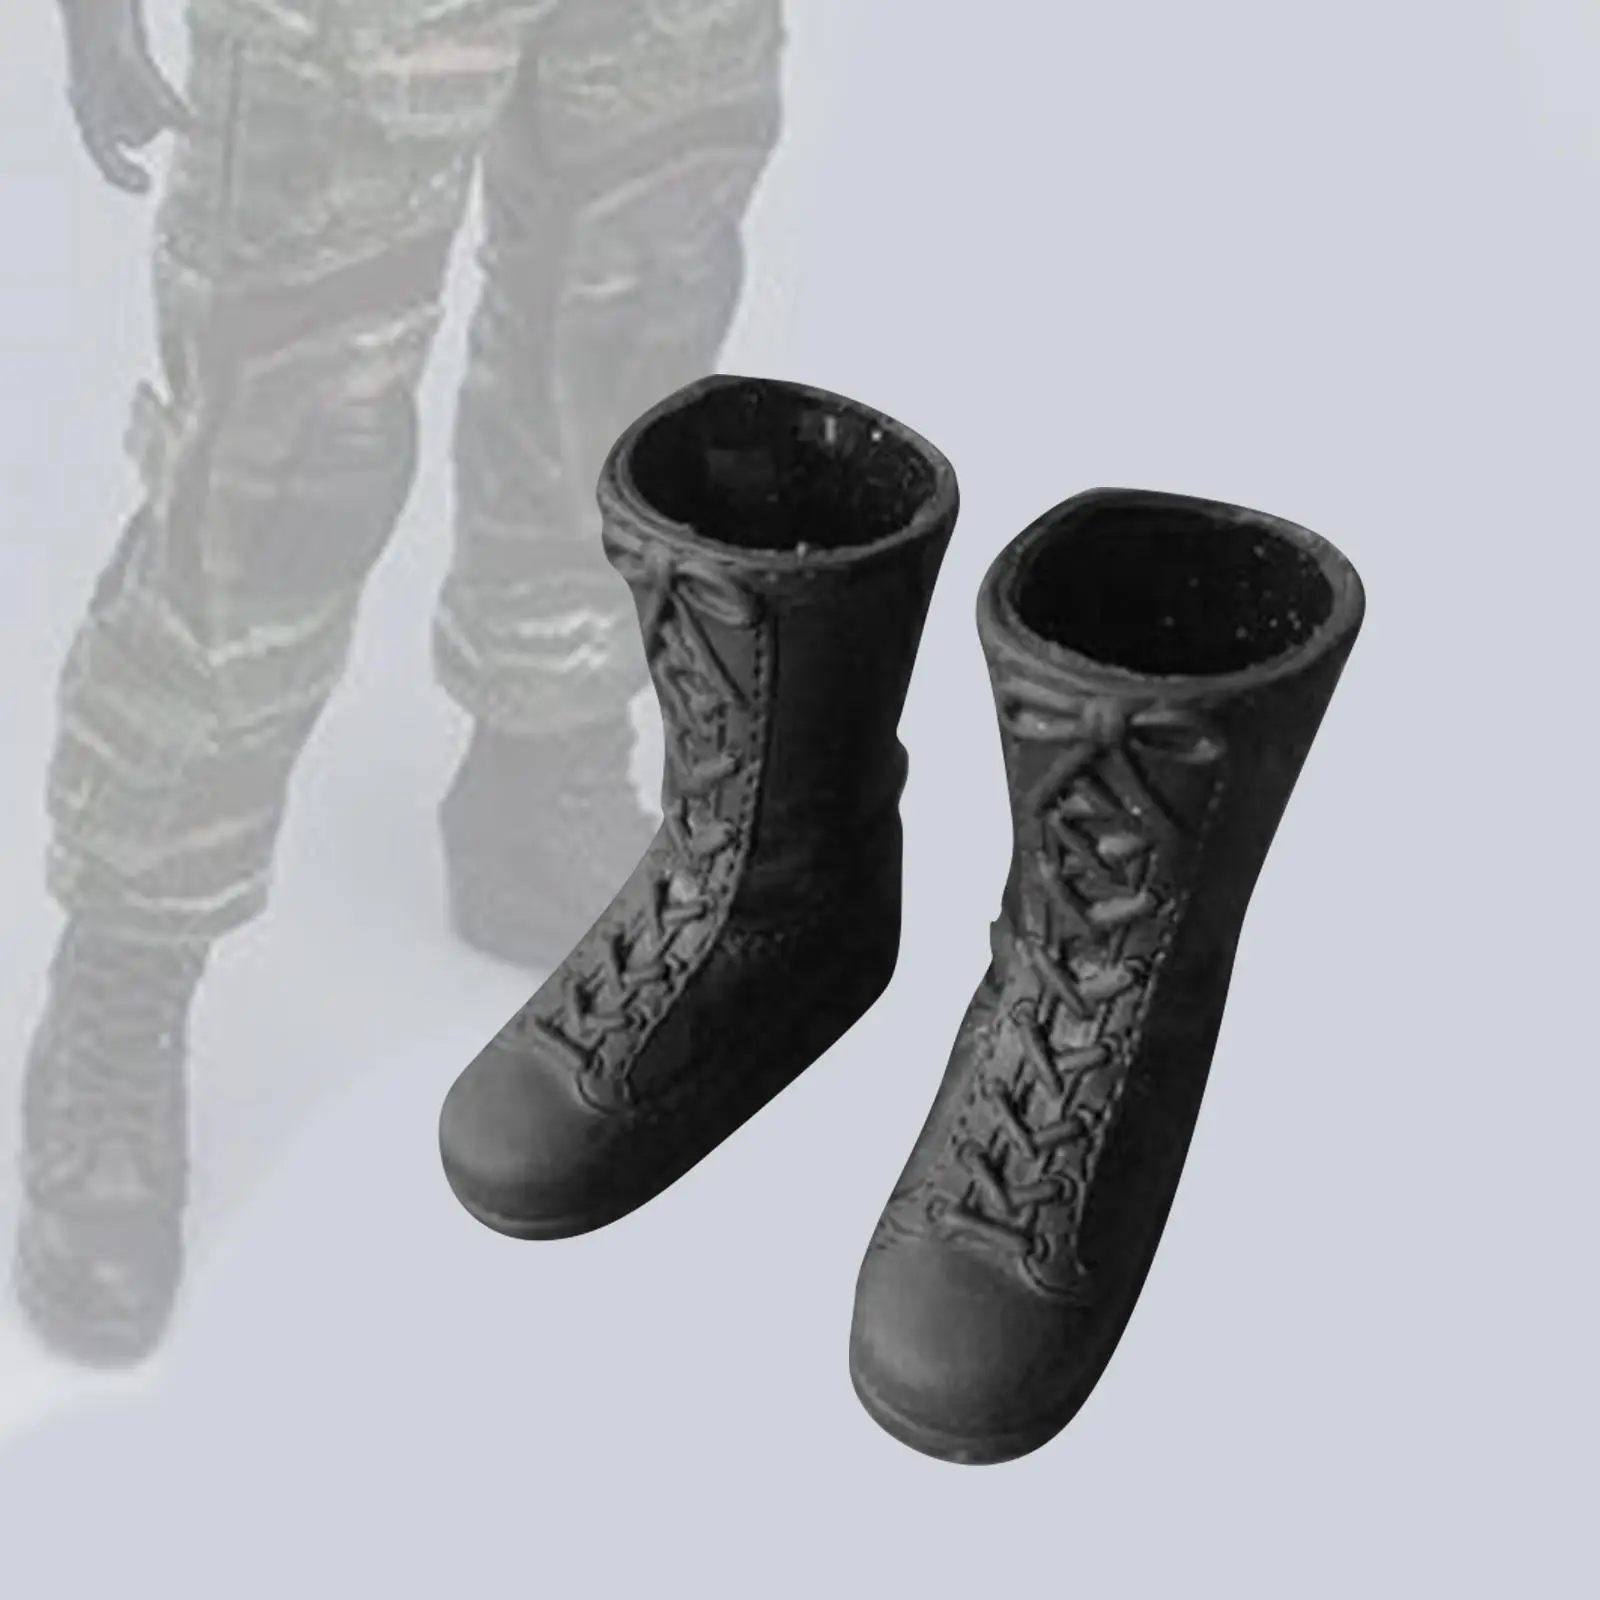 1/6 Scale Mid Calf Boots Work Boots Accessory, Female Figure Boots Costume for 12`` Action Figures Accessory Costume